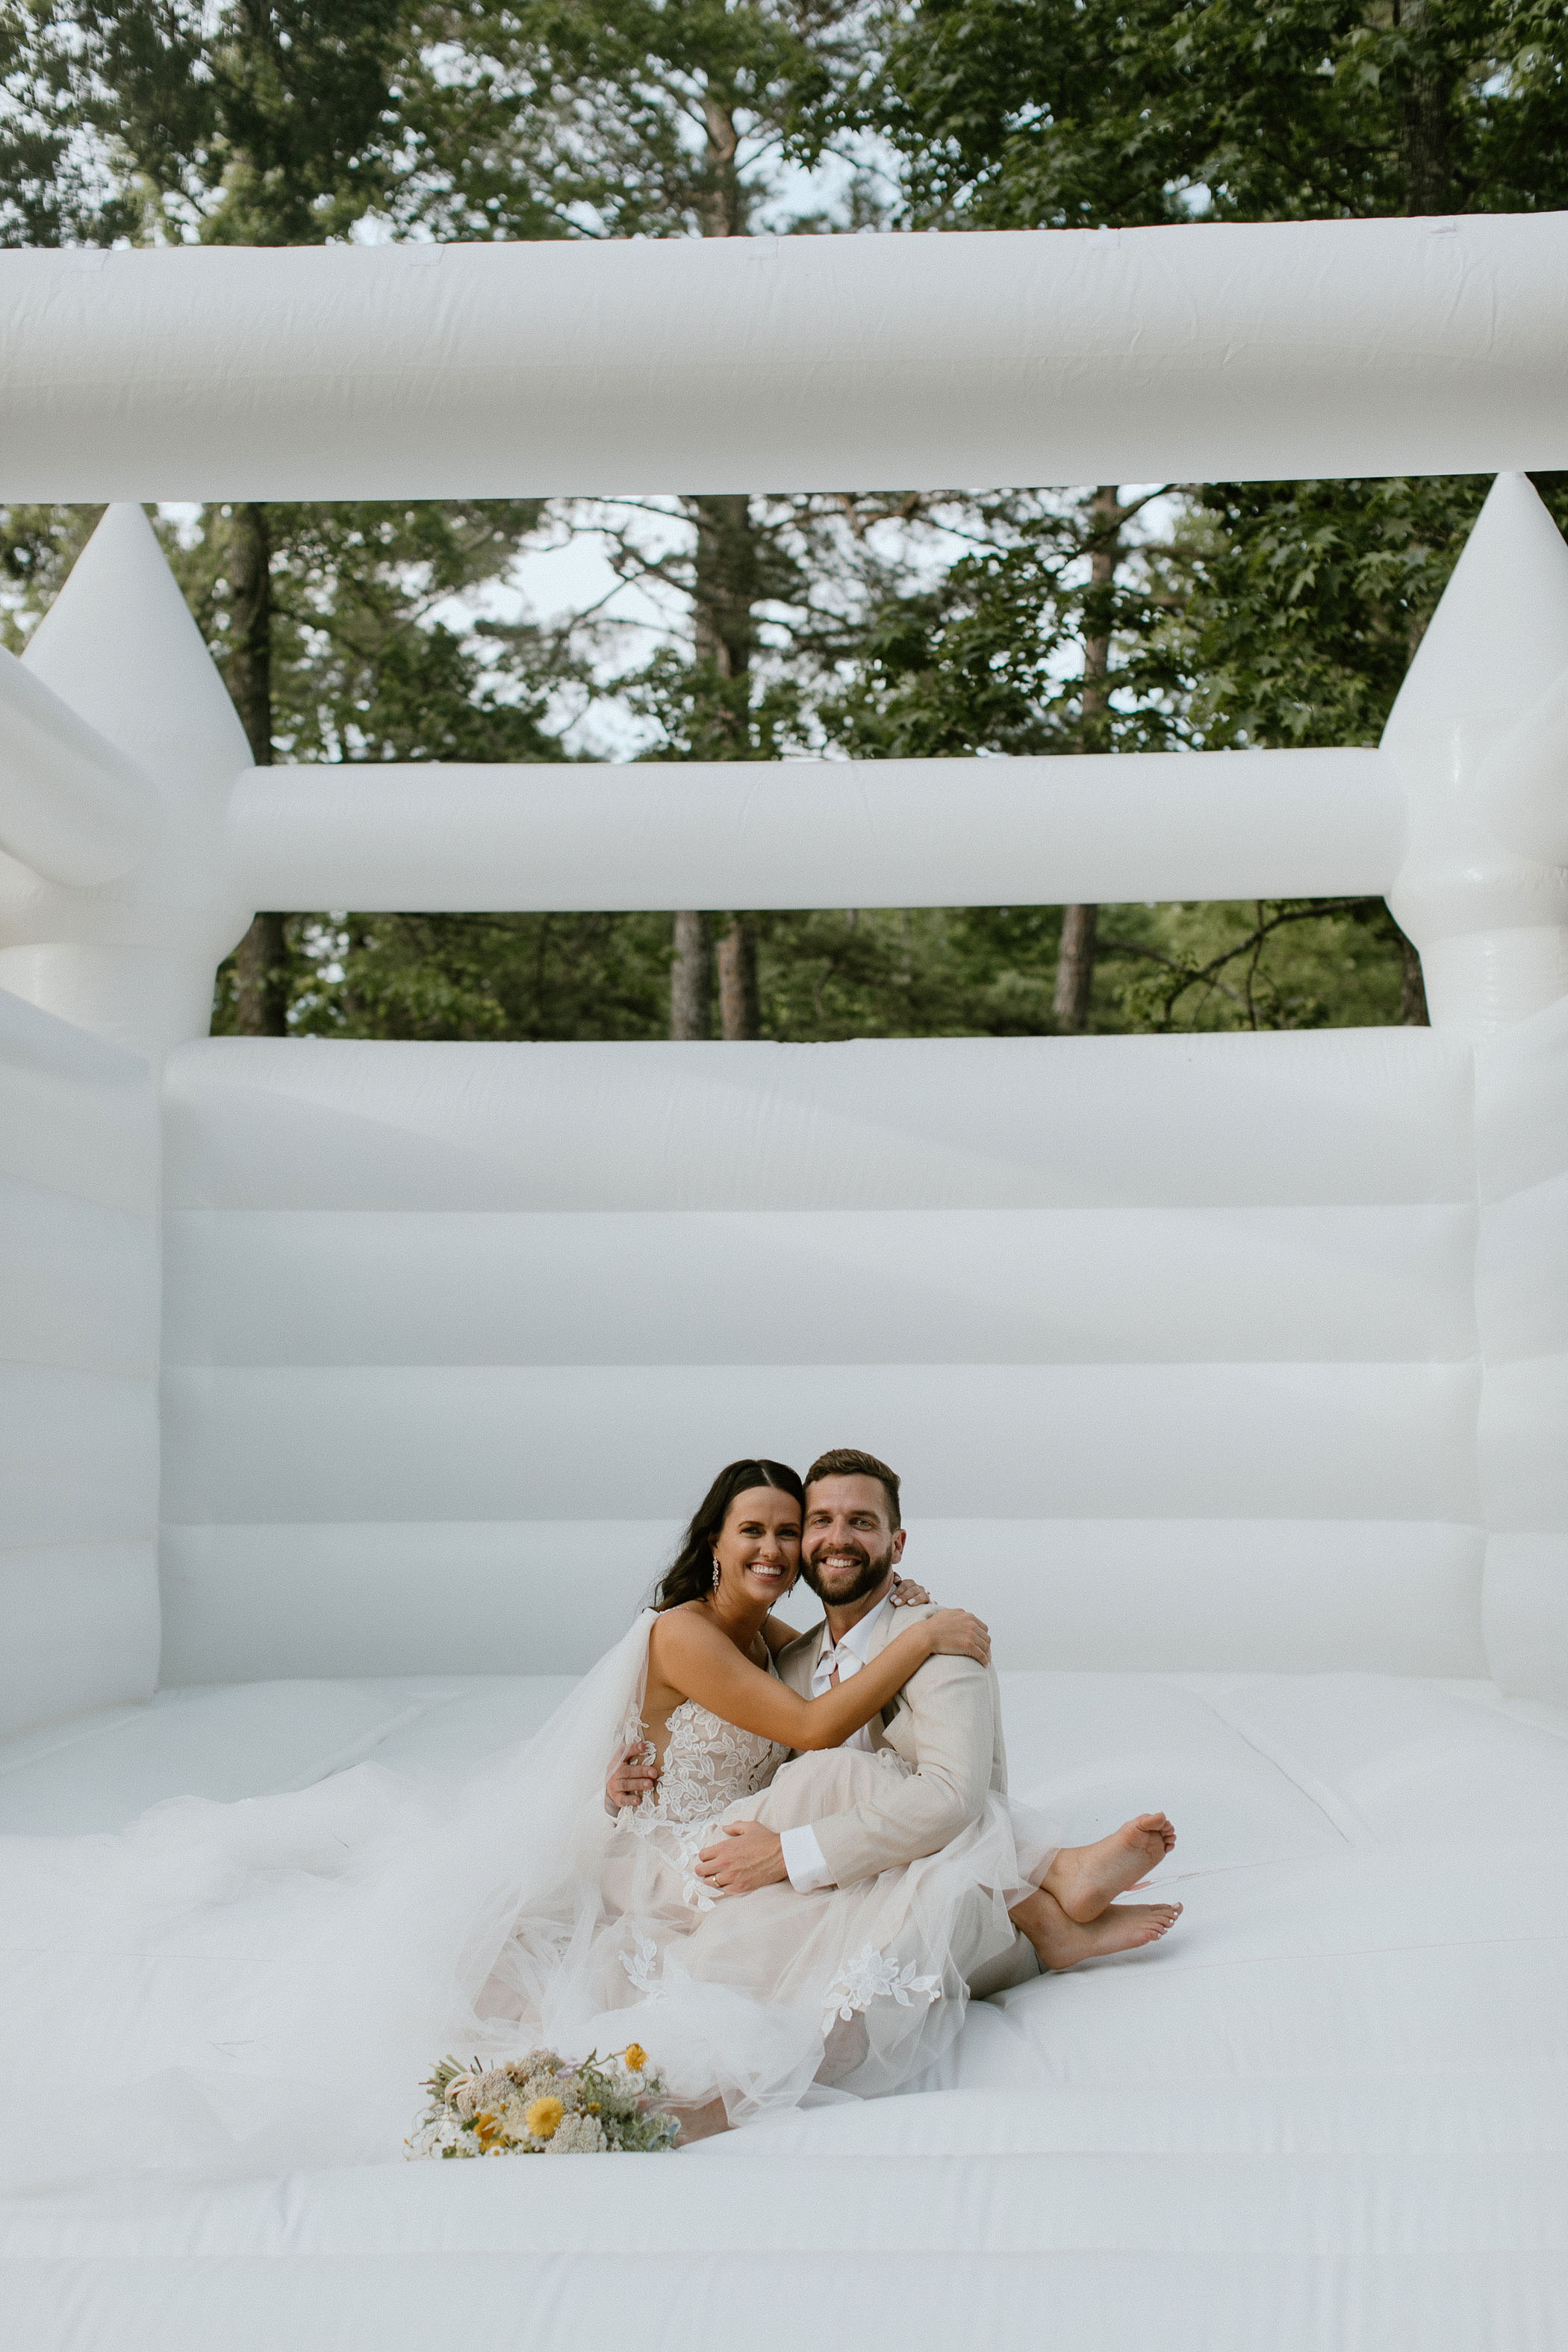 Bride and groom in bounce house on their wedding day